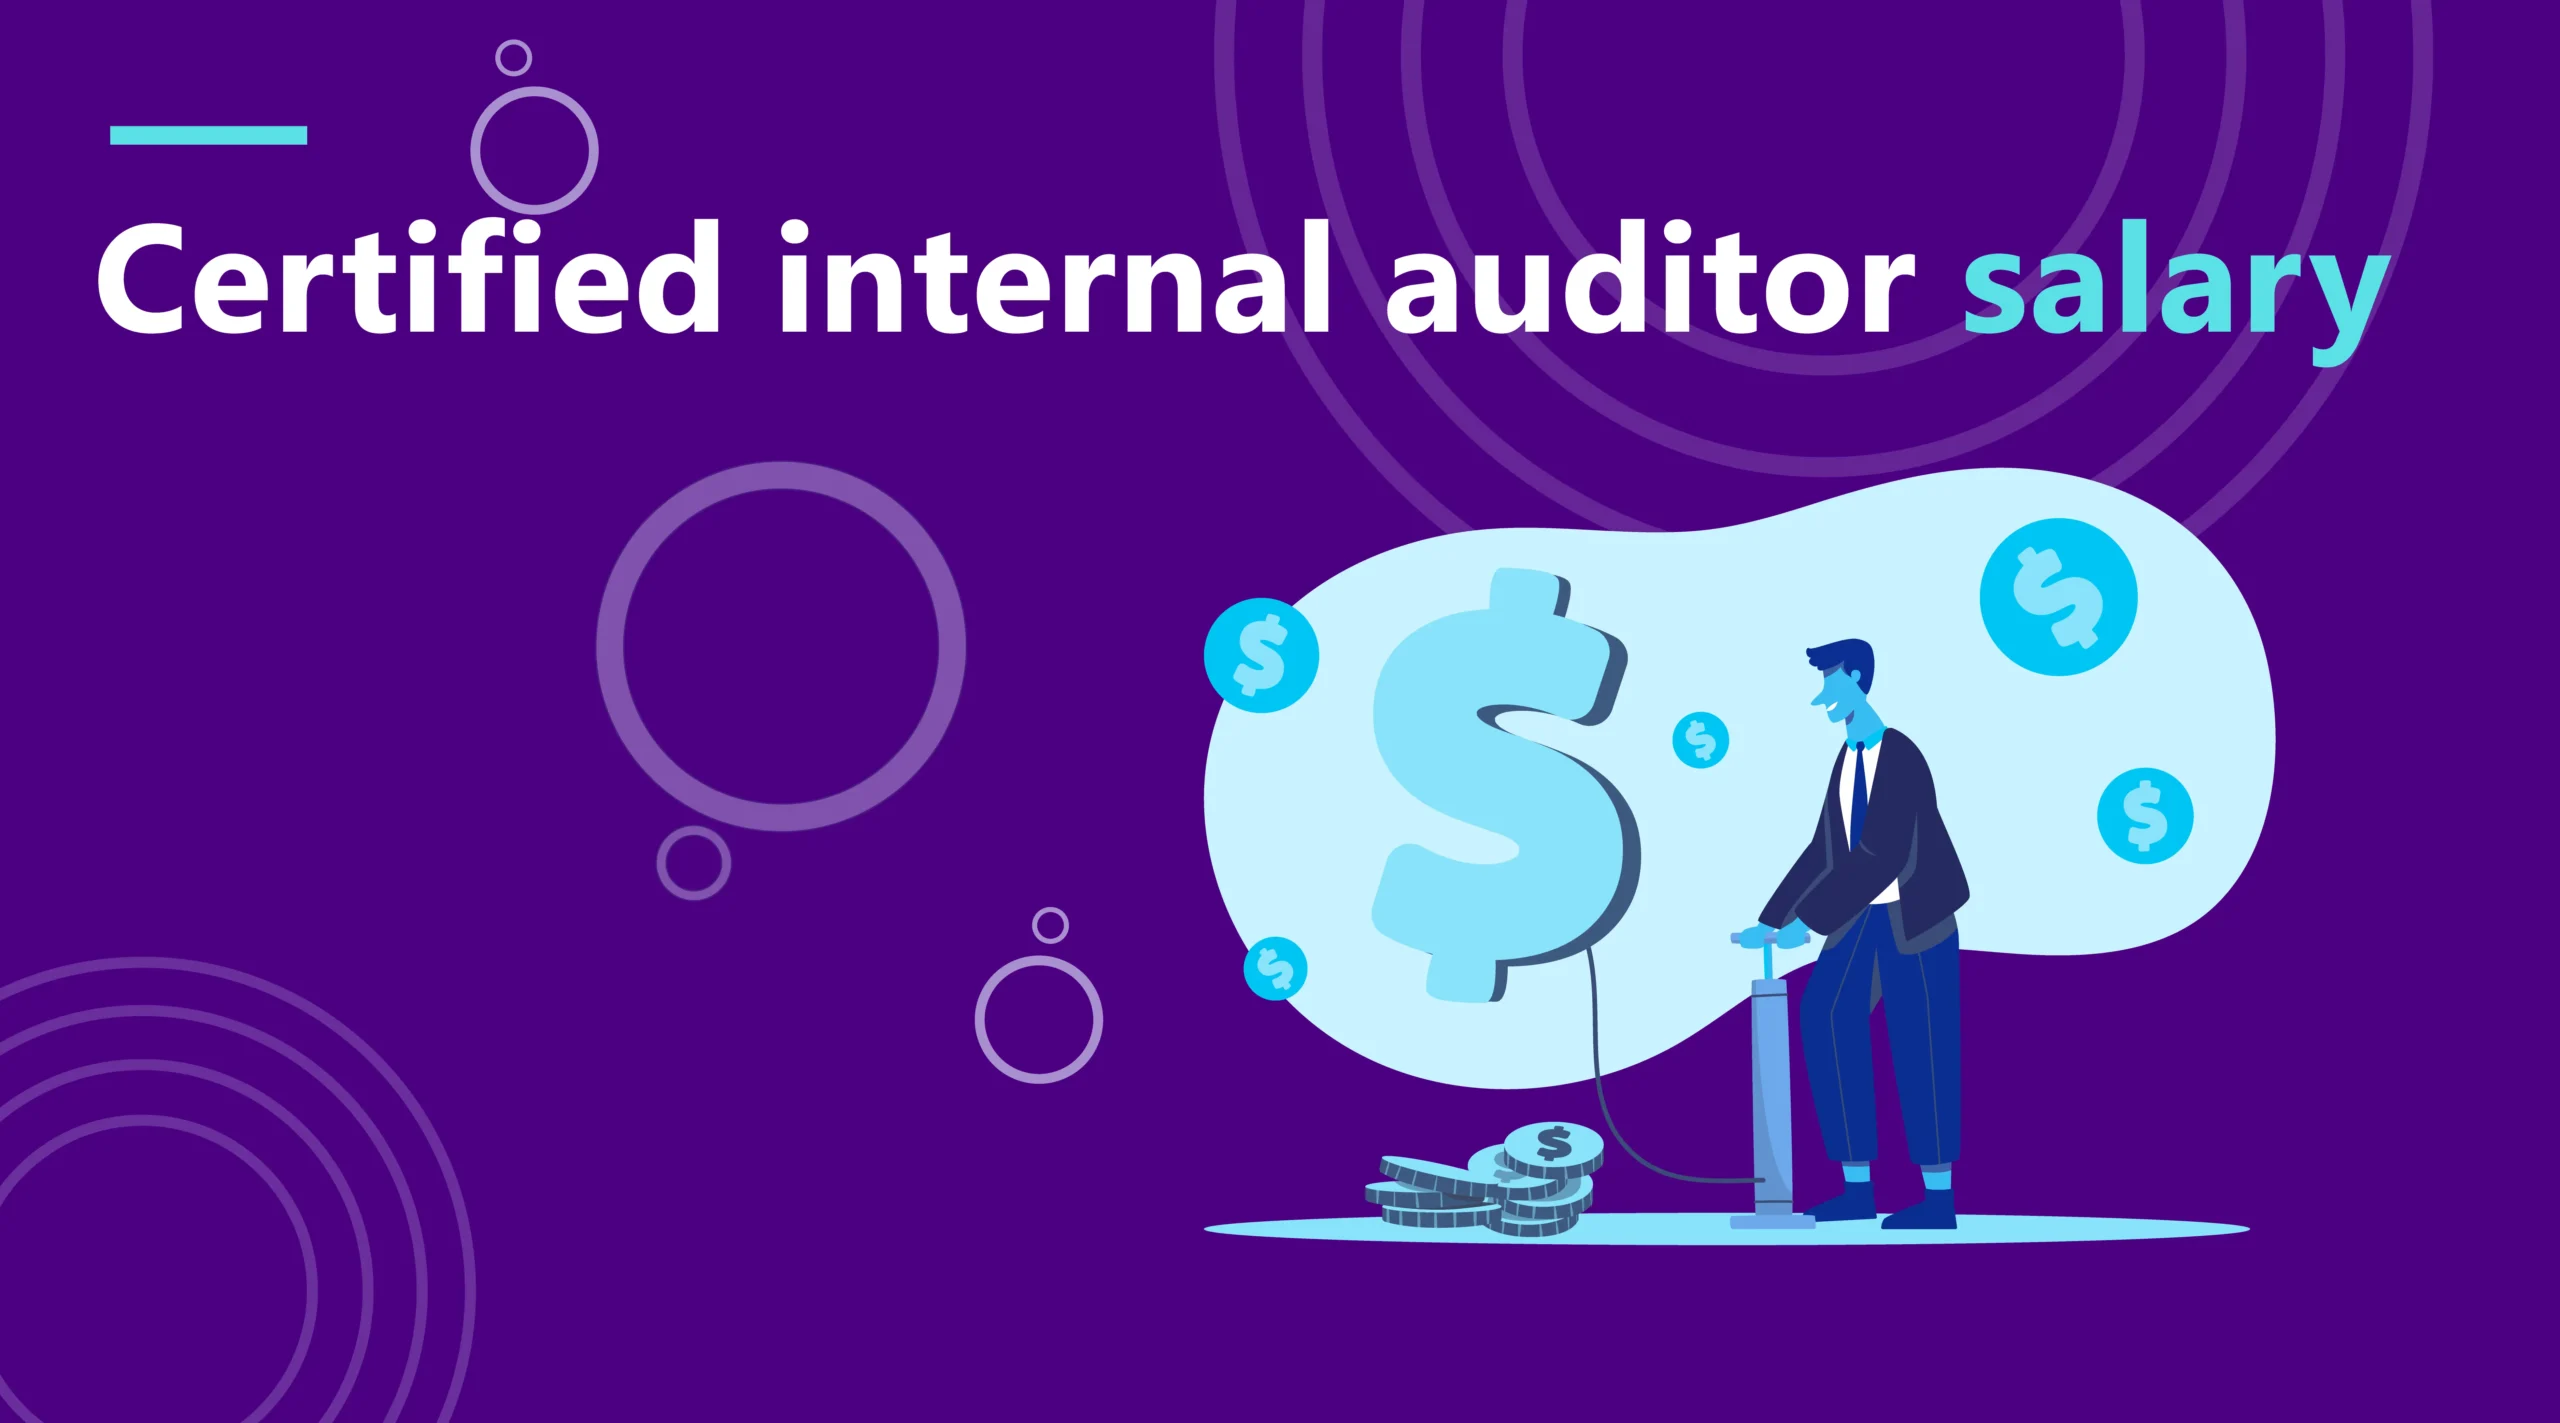 certified internal auditor salary - How much does a certified internal auditor make in the US